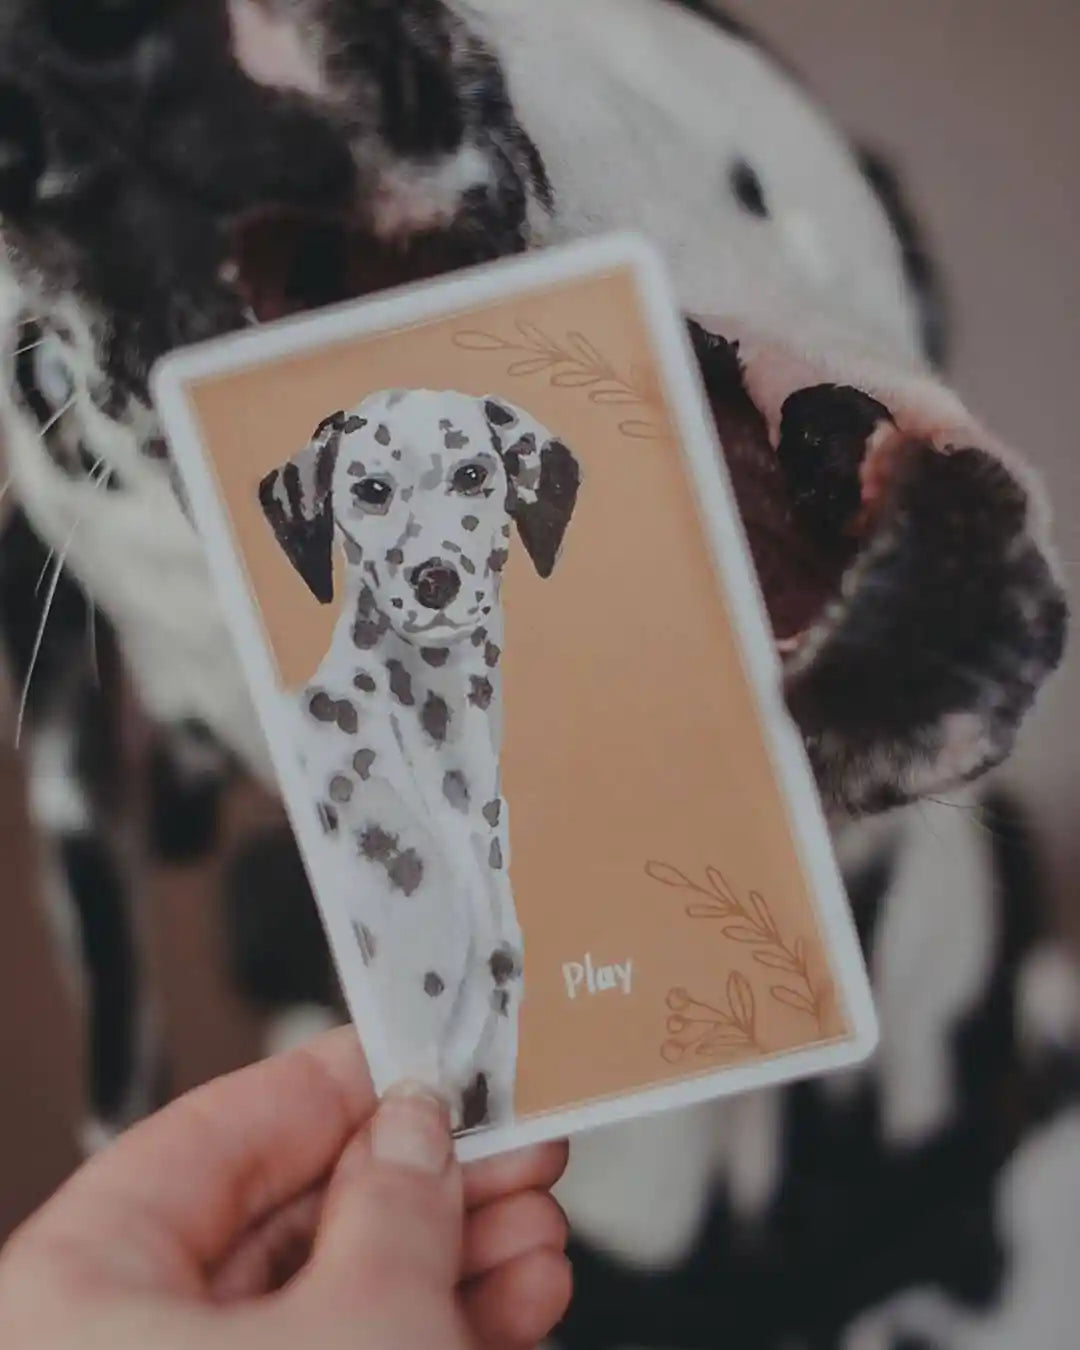 A person holds a Calm Dog Games - Brain Games & Enrichment Activity Deck card with an illustration of a dalmatian in front of a real dalmatian dog, aligning the card to camouflage half of the dog's face as part of Your Whole Dog.